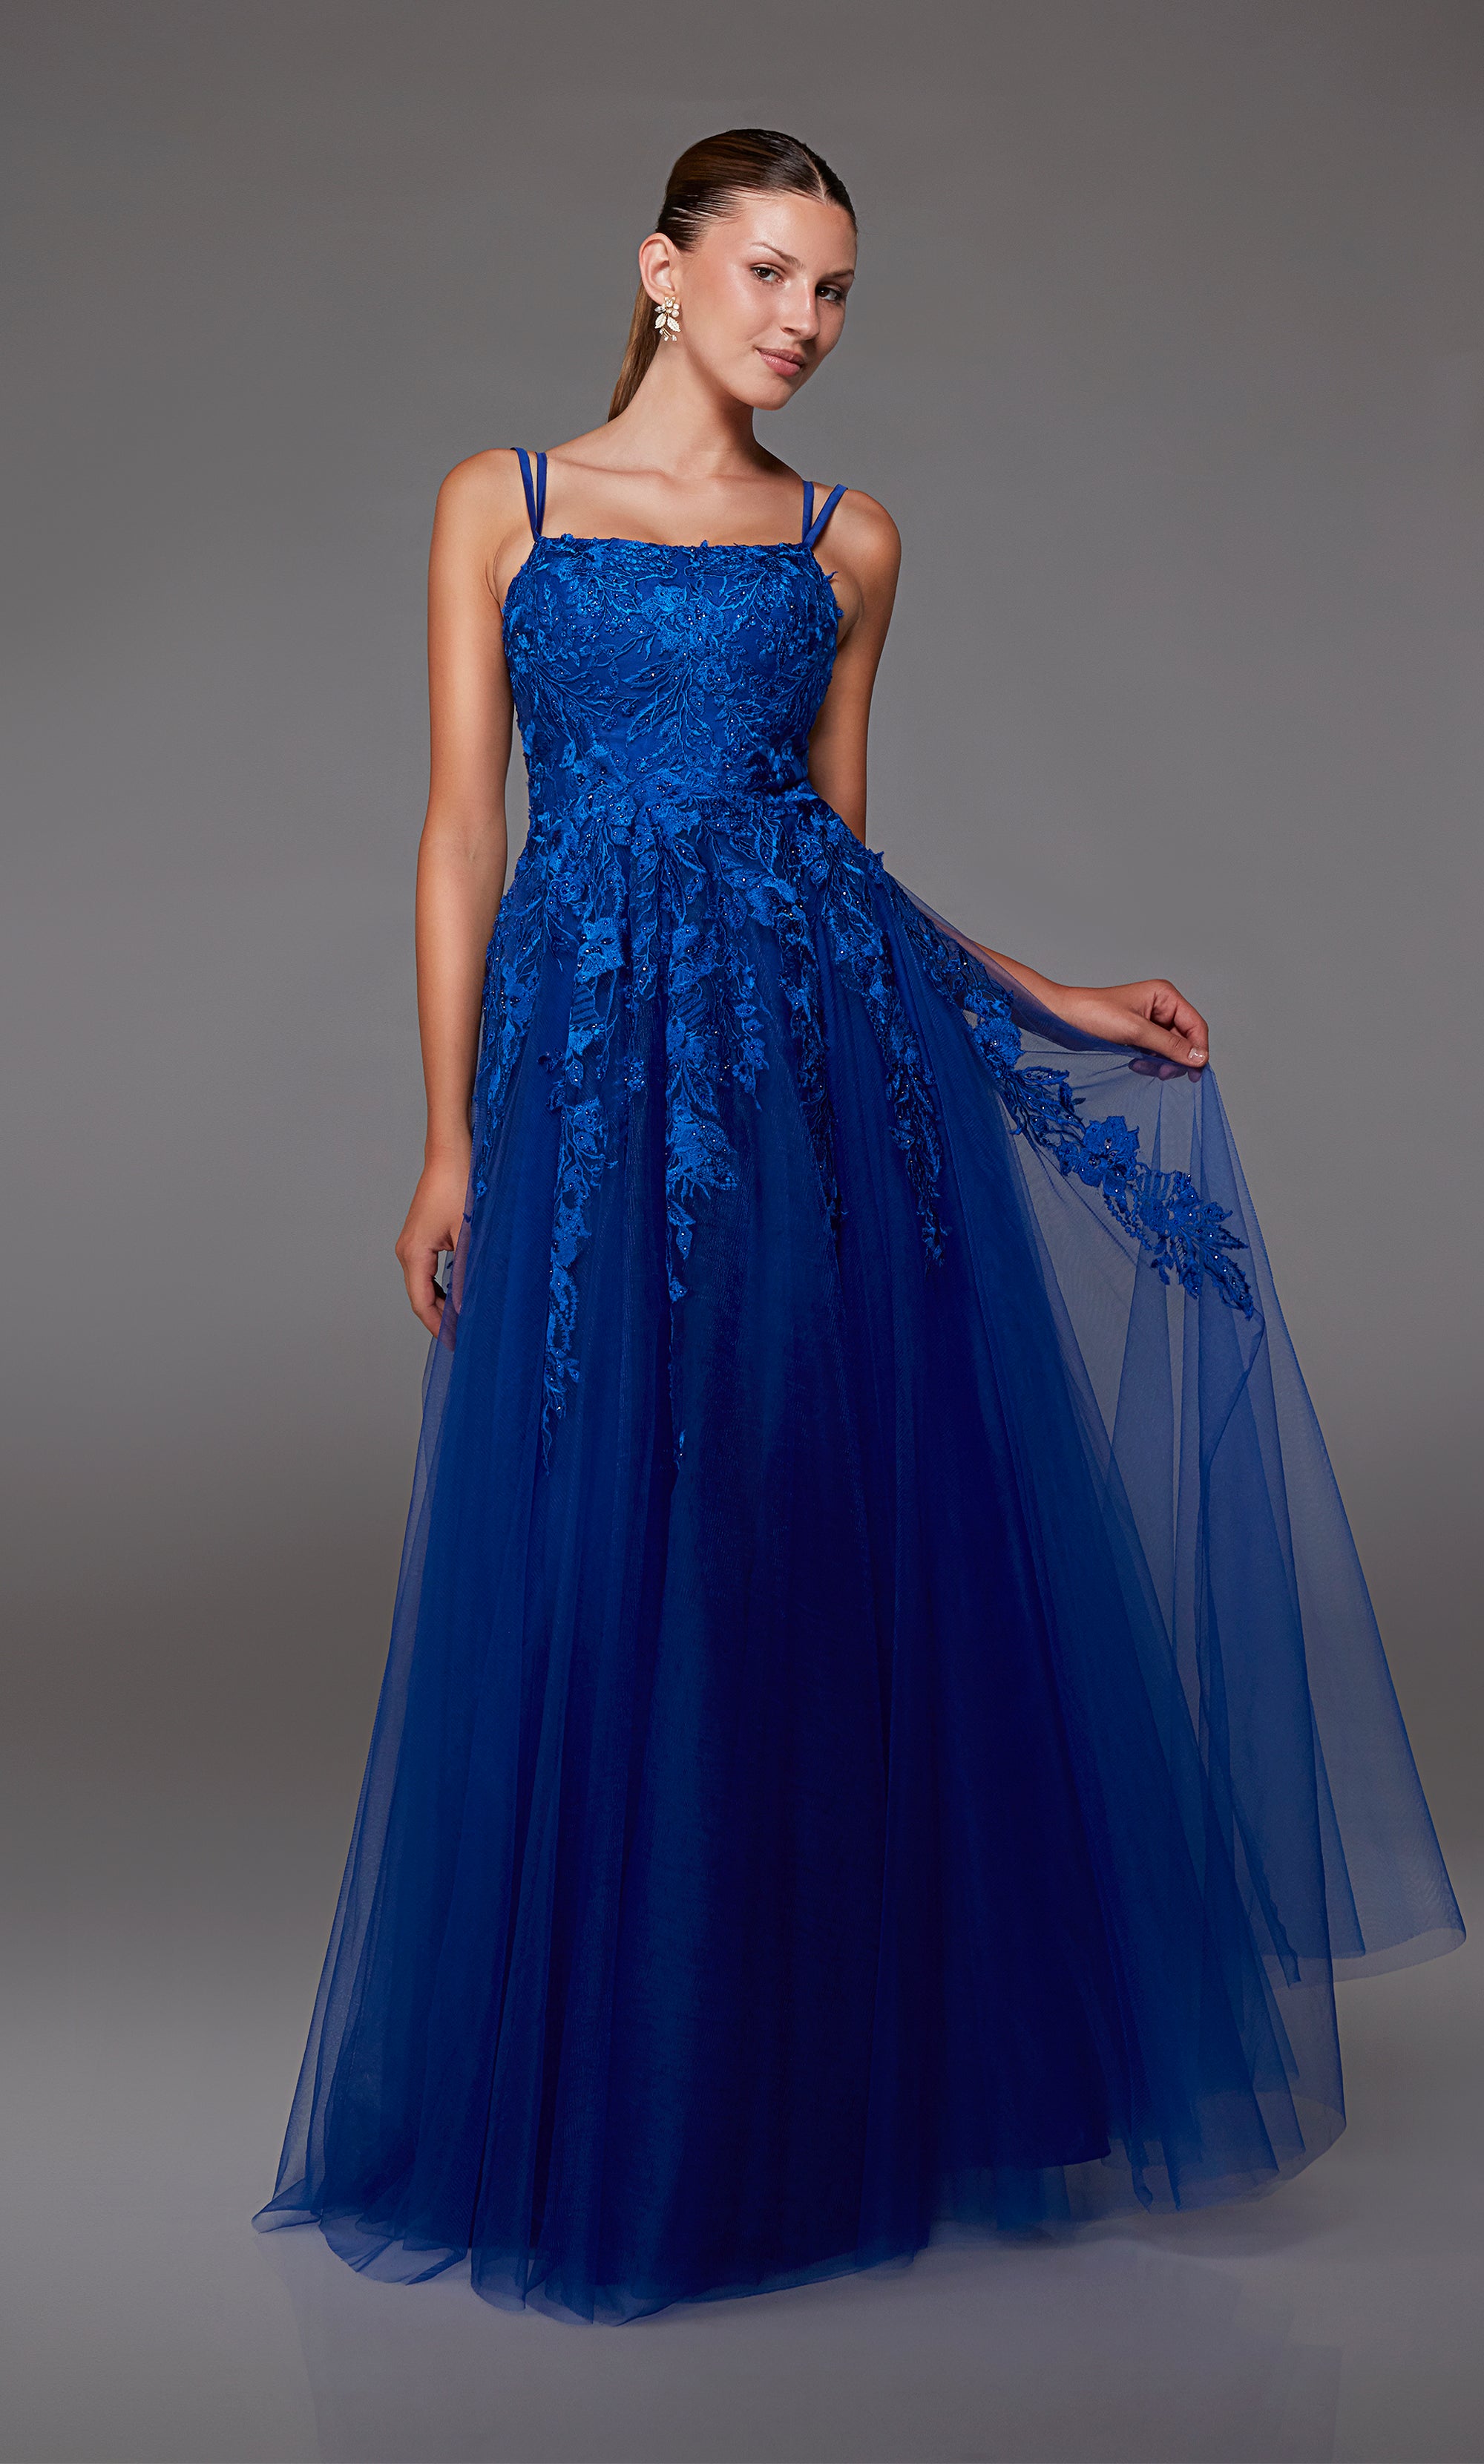 A-line silhouette, royal blue prom dress with an square neckline, dual straps, zip-up back, and delicate lace appliques for an touch of elegance.